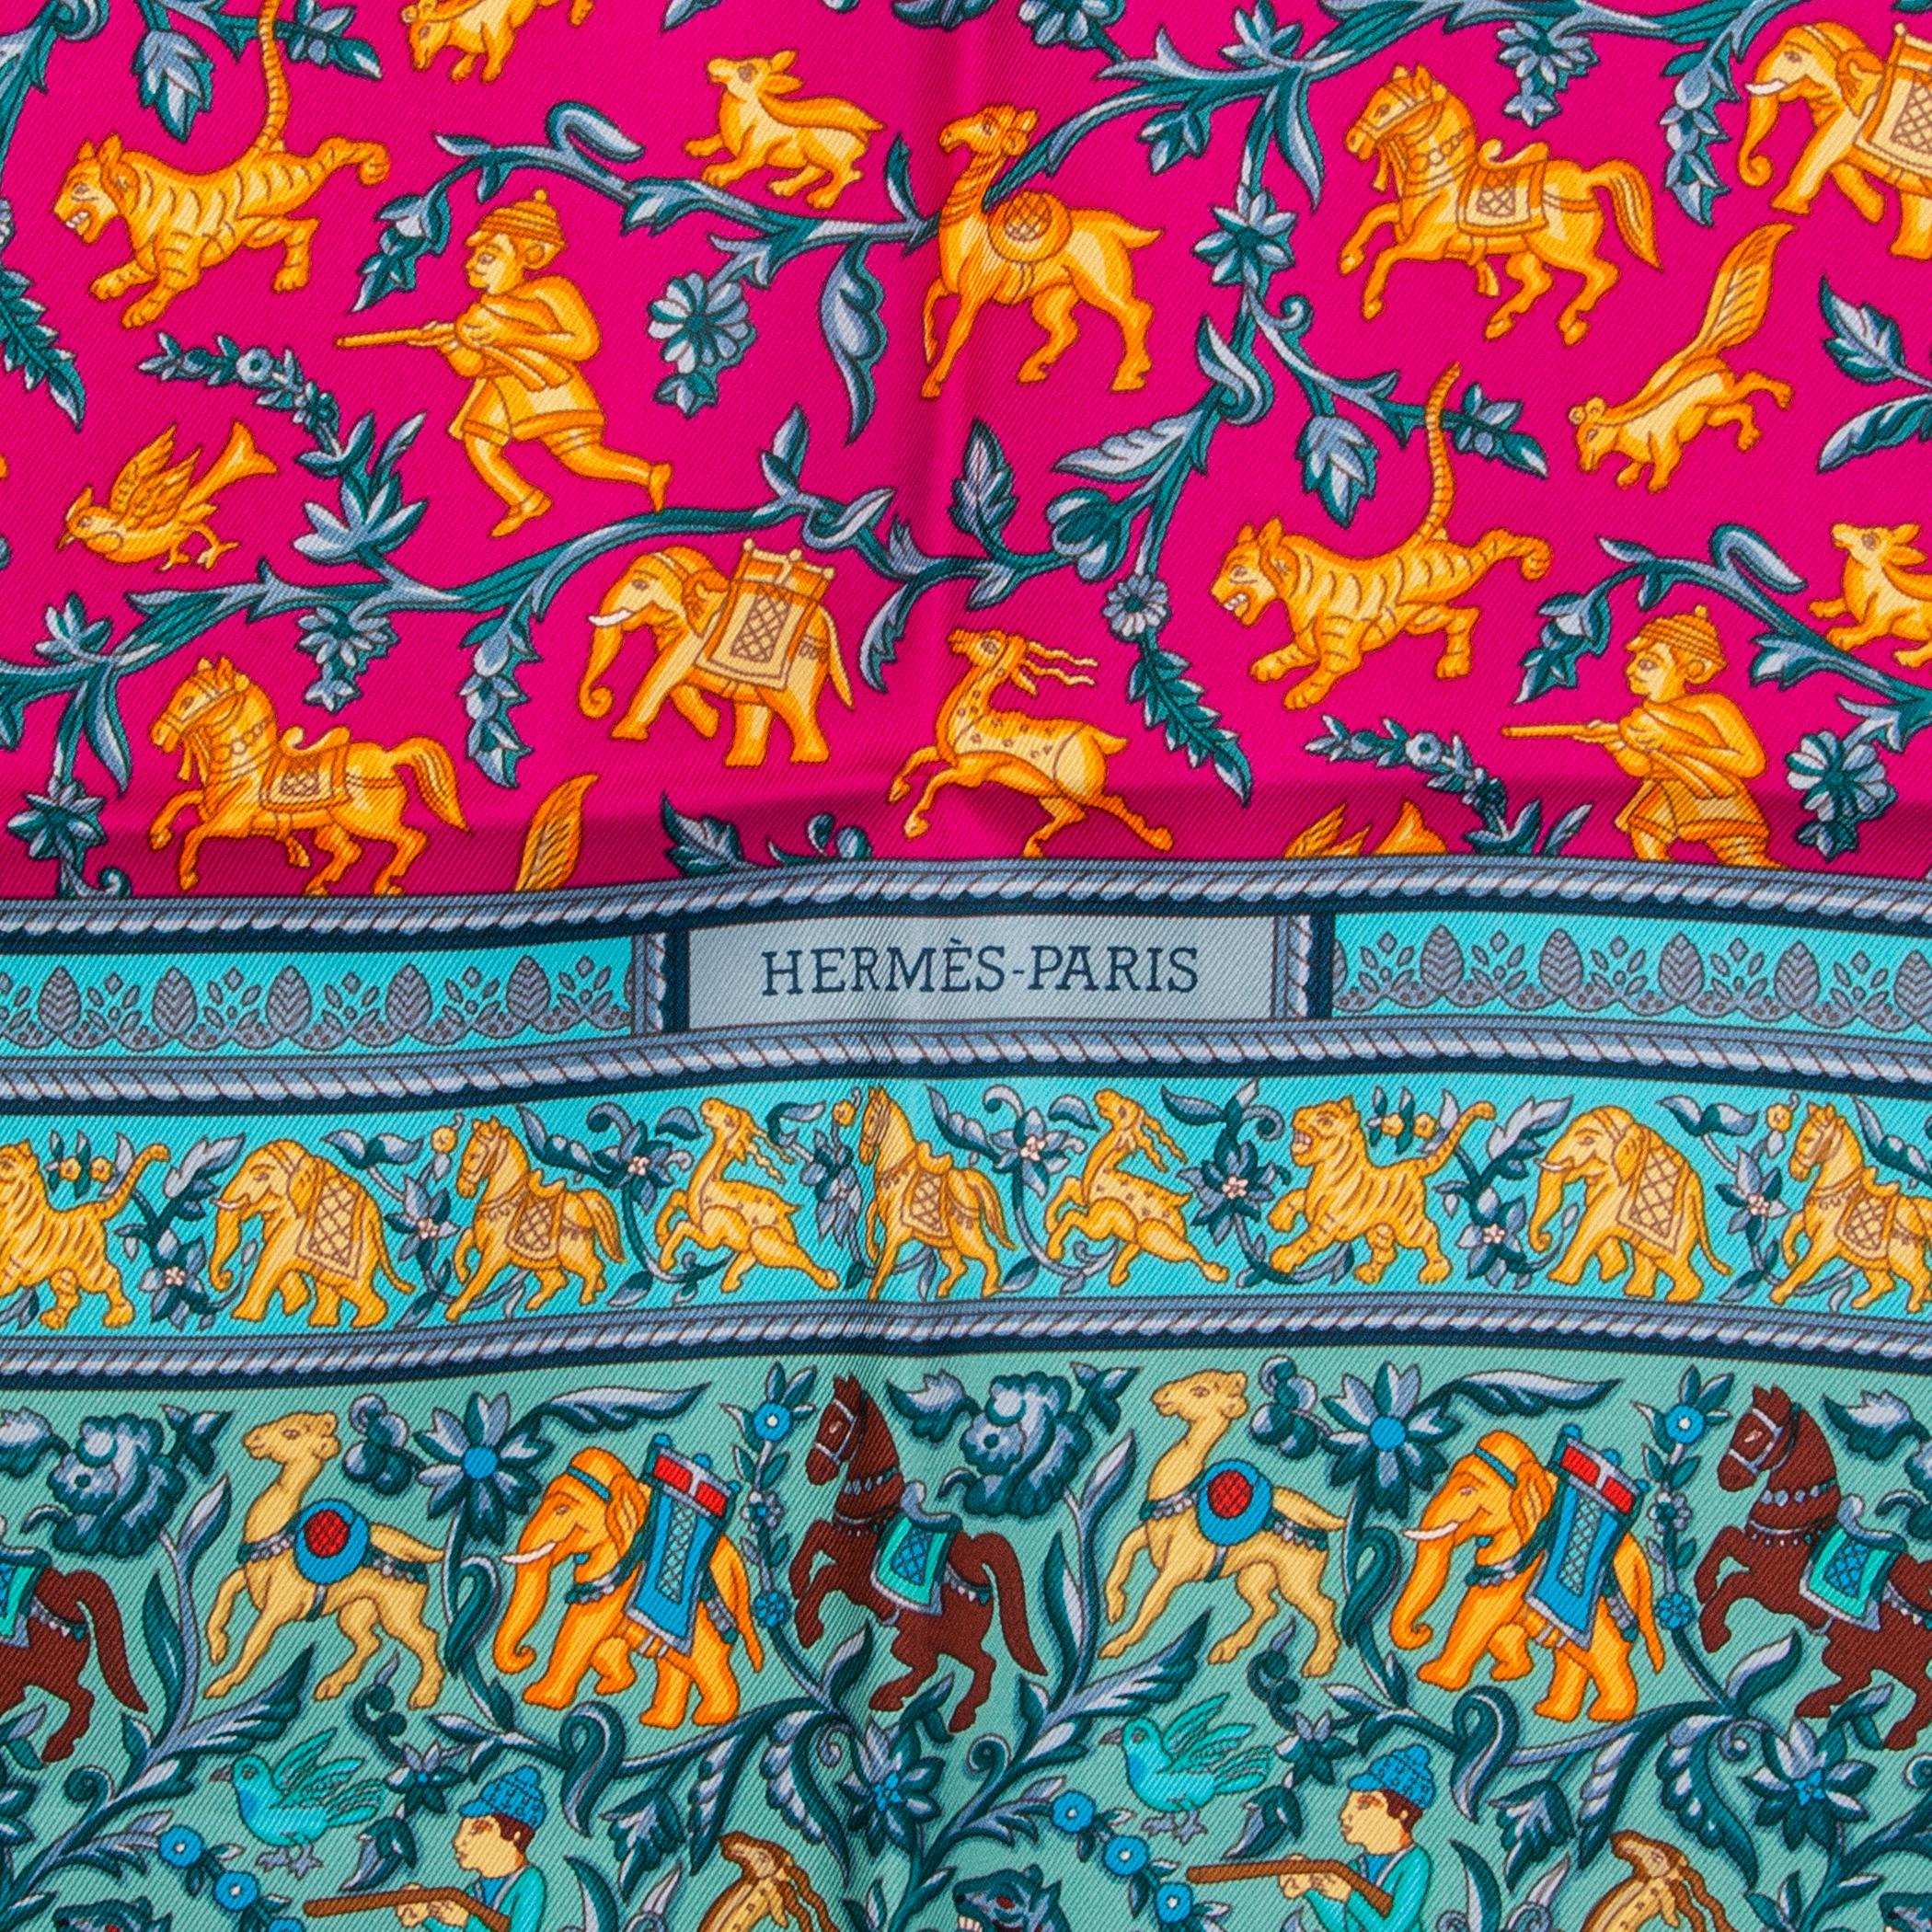 Hermes 'Chasse en Inde' by Michel Duchen scarf in passion fruit, cyan, turquoise, fuchsia, and brown silk twill. Has been worn and is in excellent condition. 

Width 90cm (35.1in)
Height 90cm (35.1in)